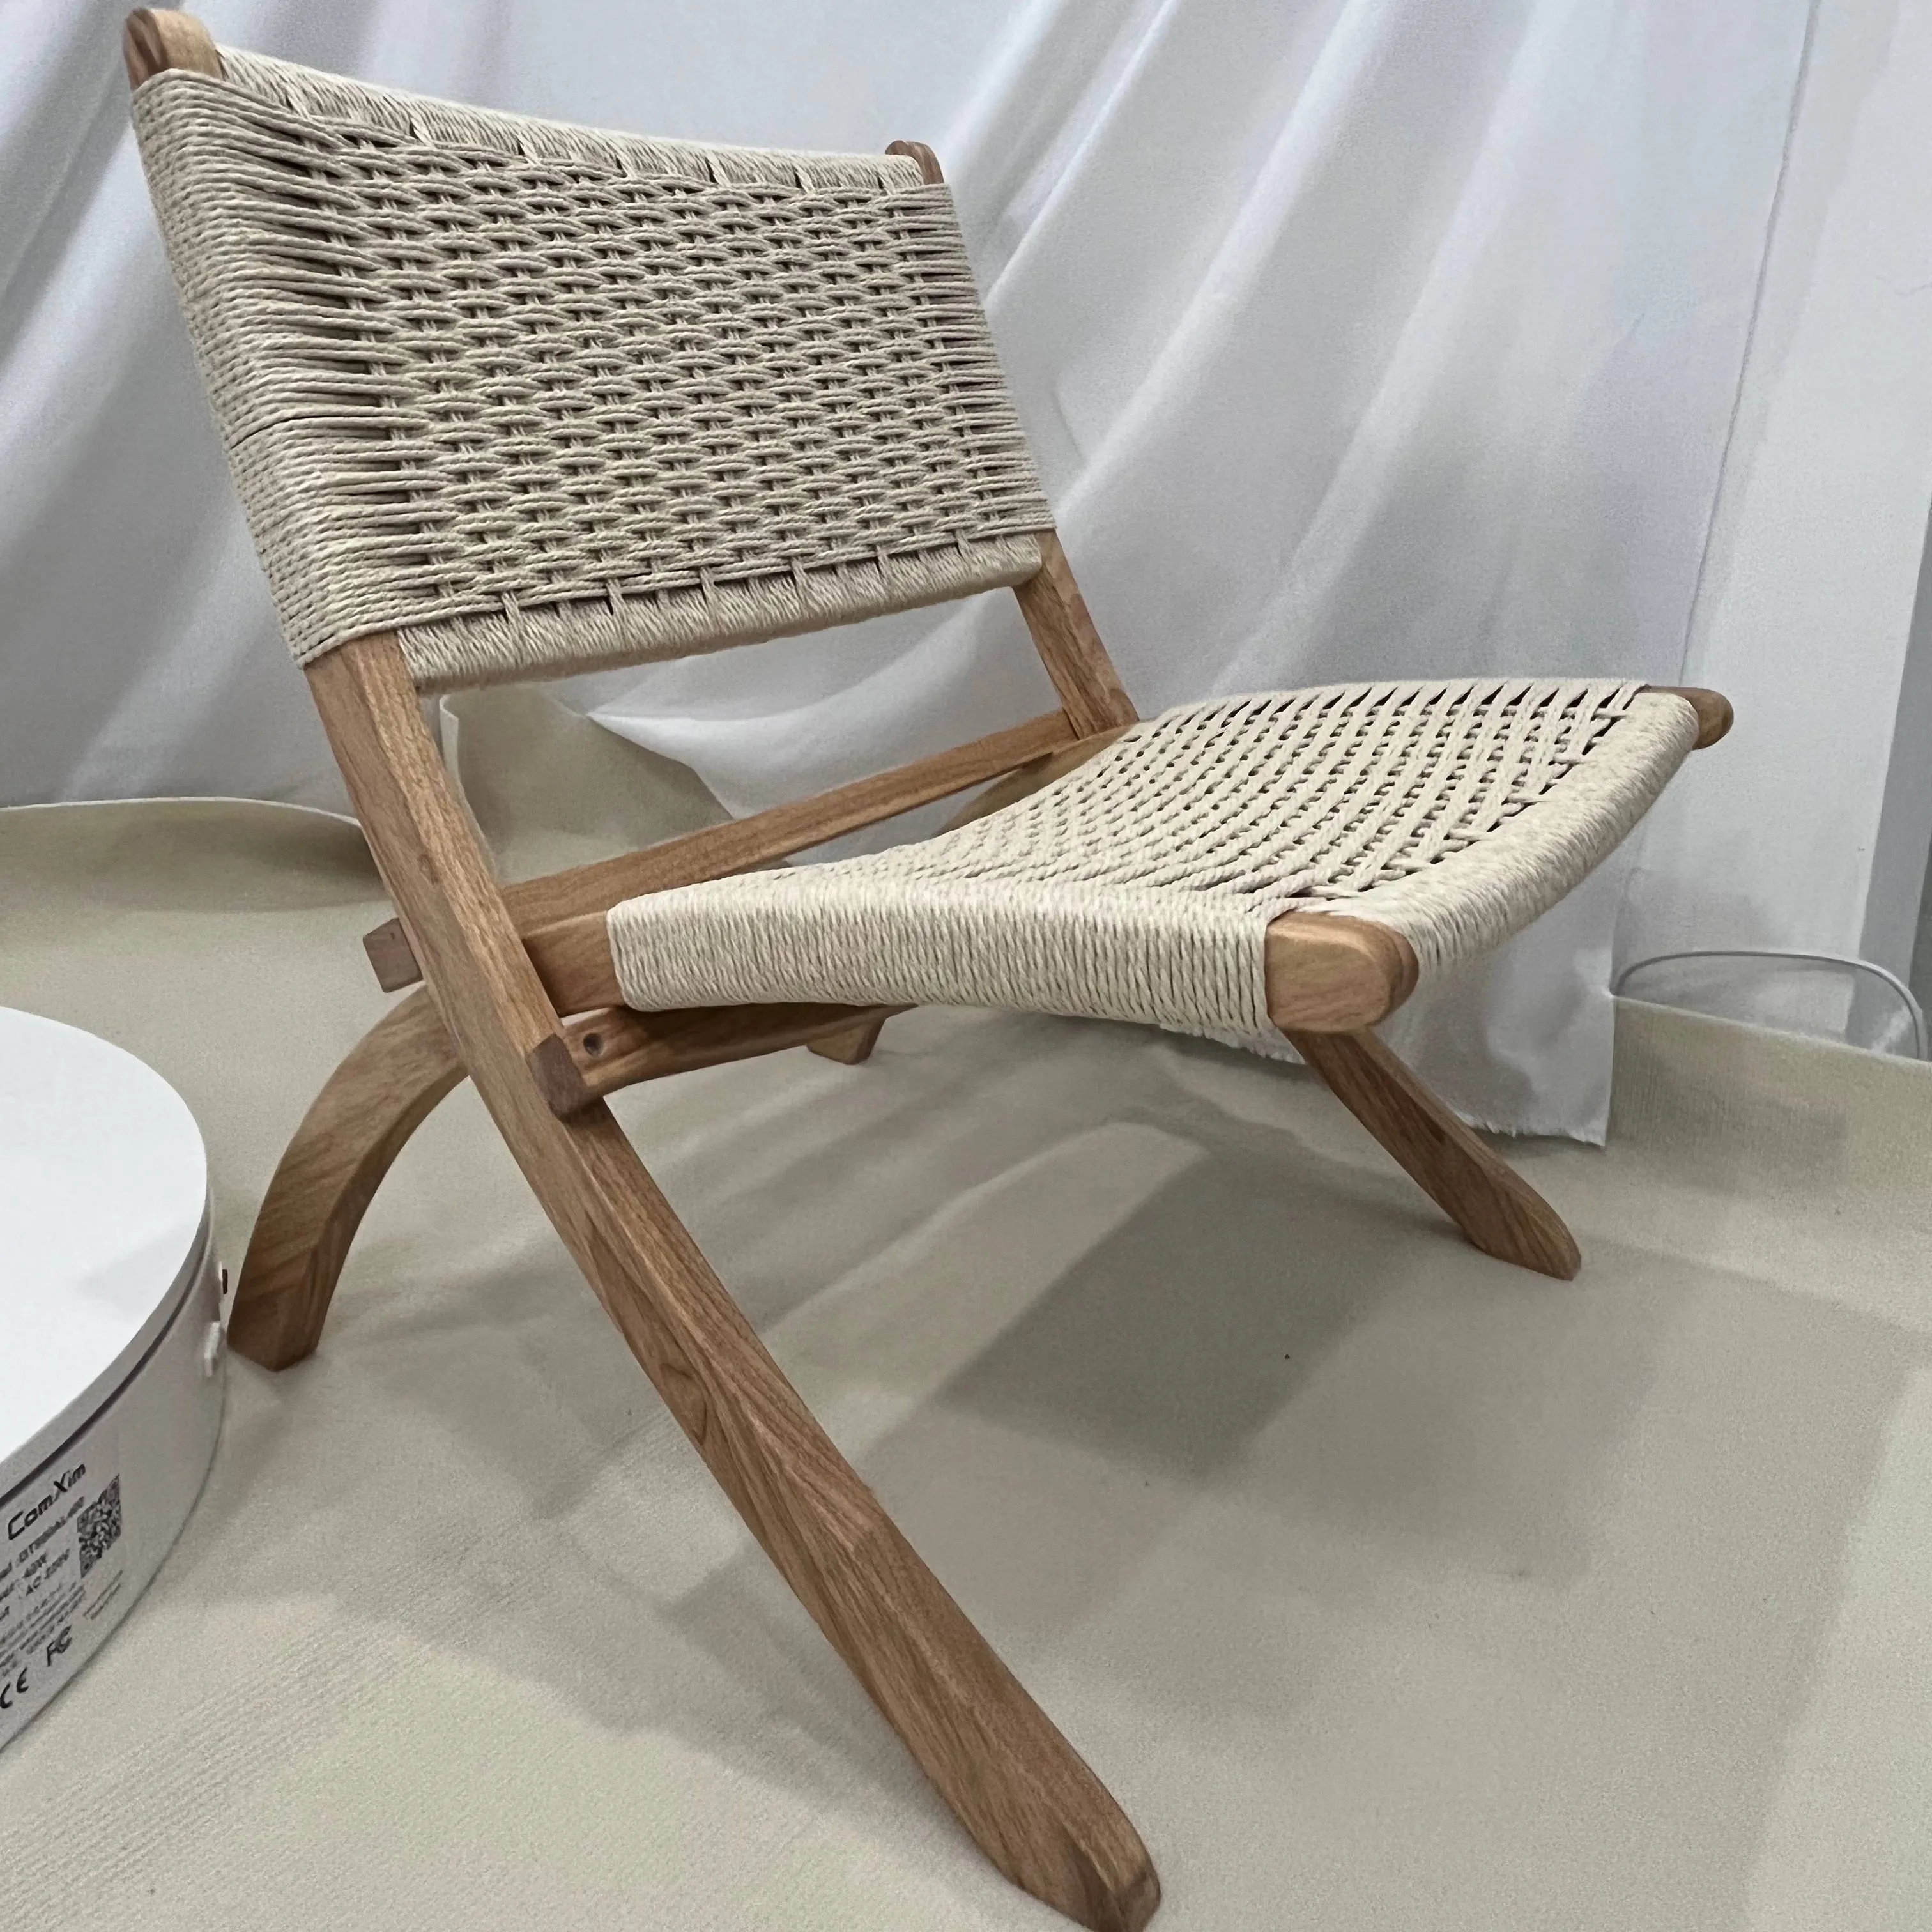 XY Best Solid Wood Rattan Porch Shoe Stool - Living Room Chair Strap Weaving Outdoor Chair